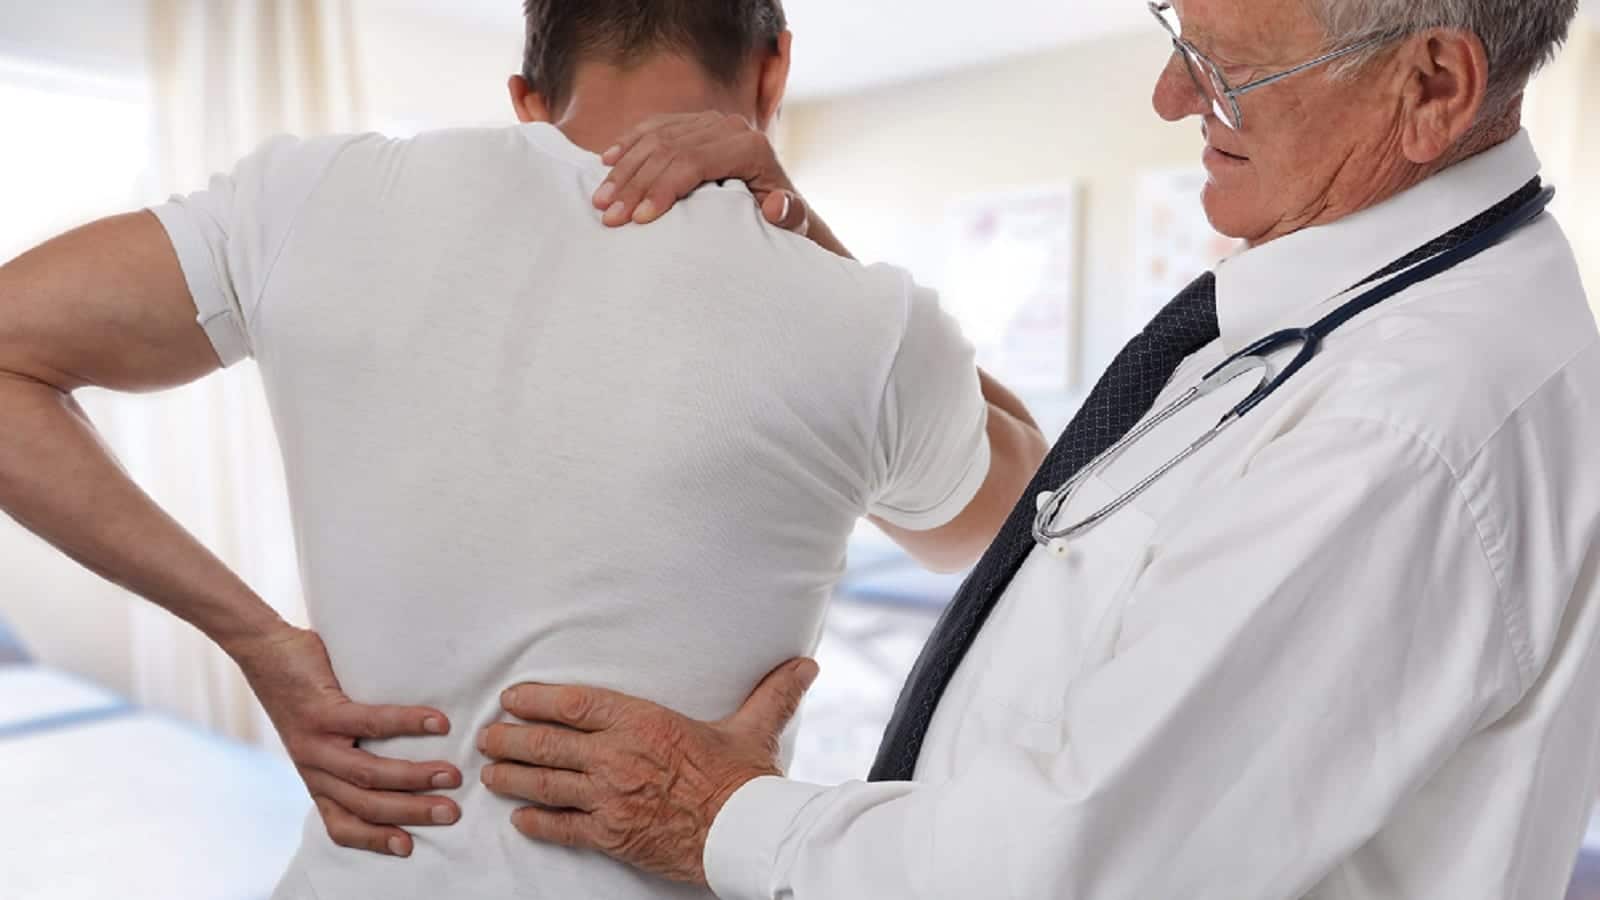 Male Doctor and patient suffering from back pain during medical exam.